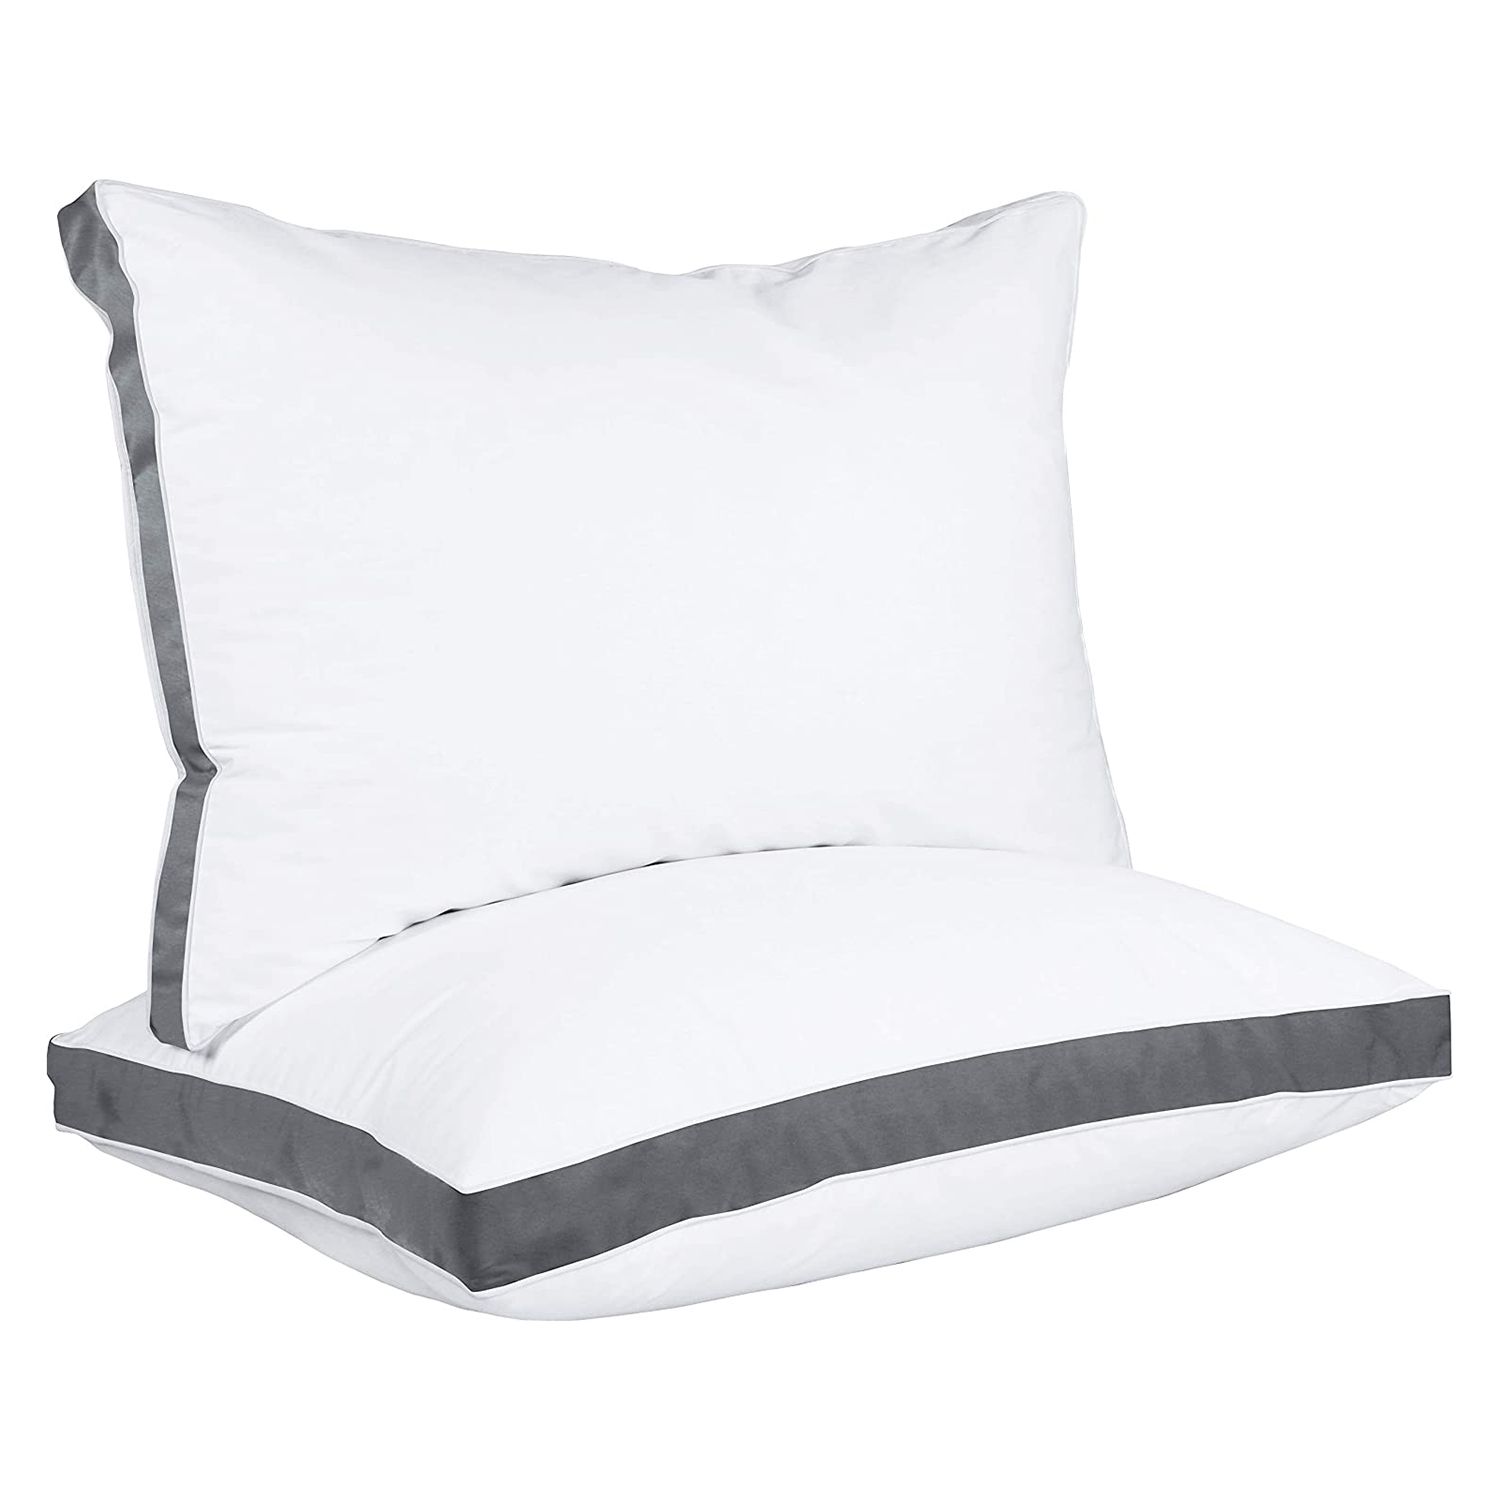 Utopia Bedding Bed Pillows for Sleeping Standard Size, Set of 2